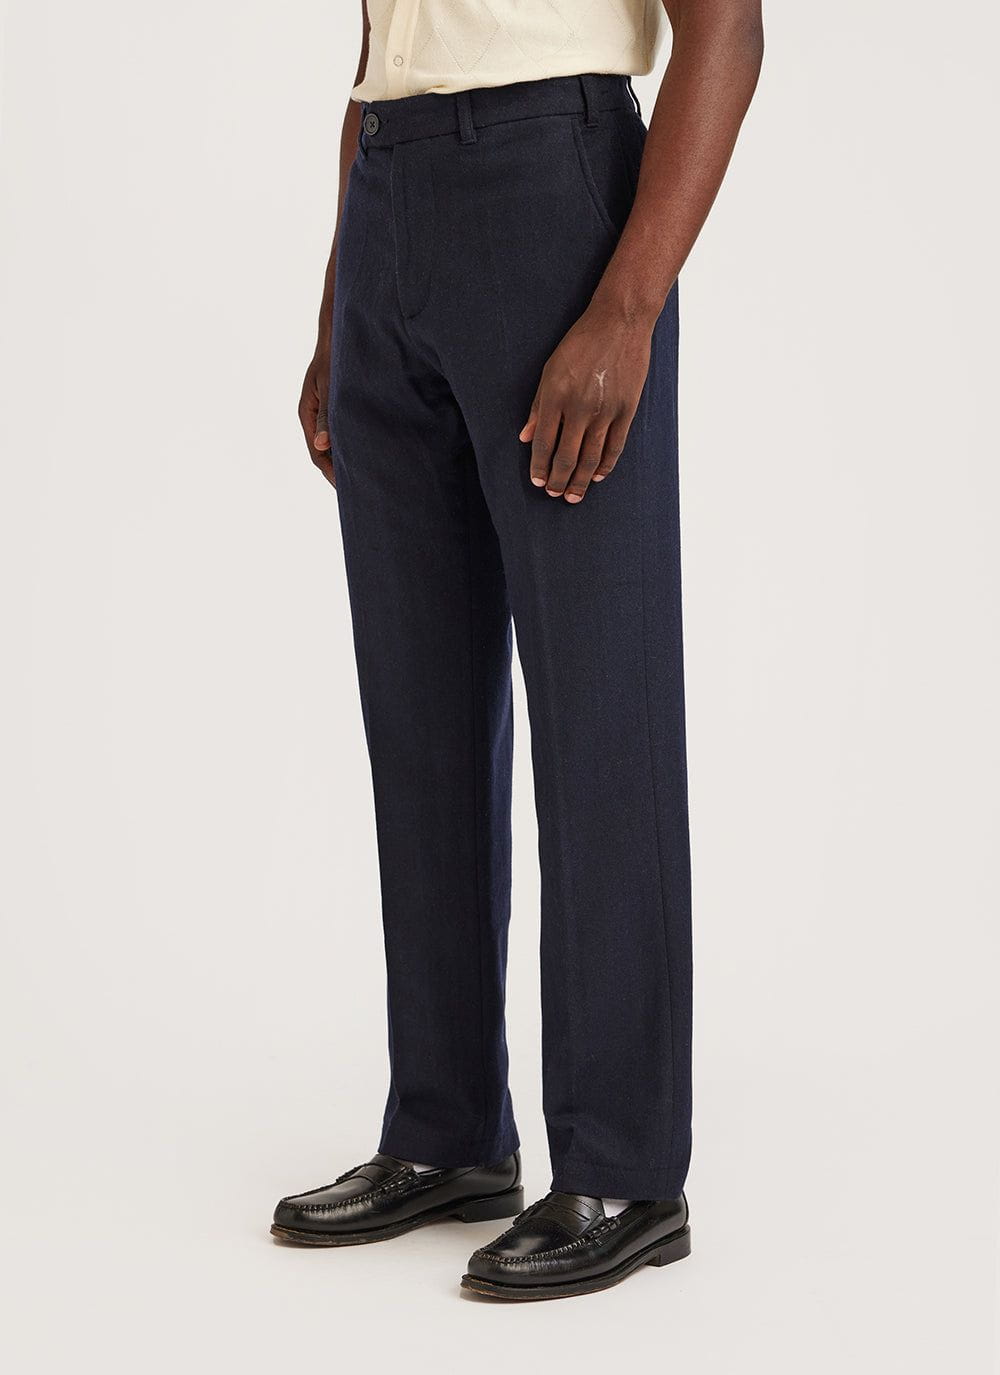 Taylor & Wright Orwell Navy Tailored Fit Suit Trousers - Matalan